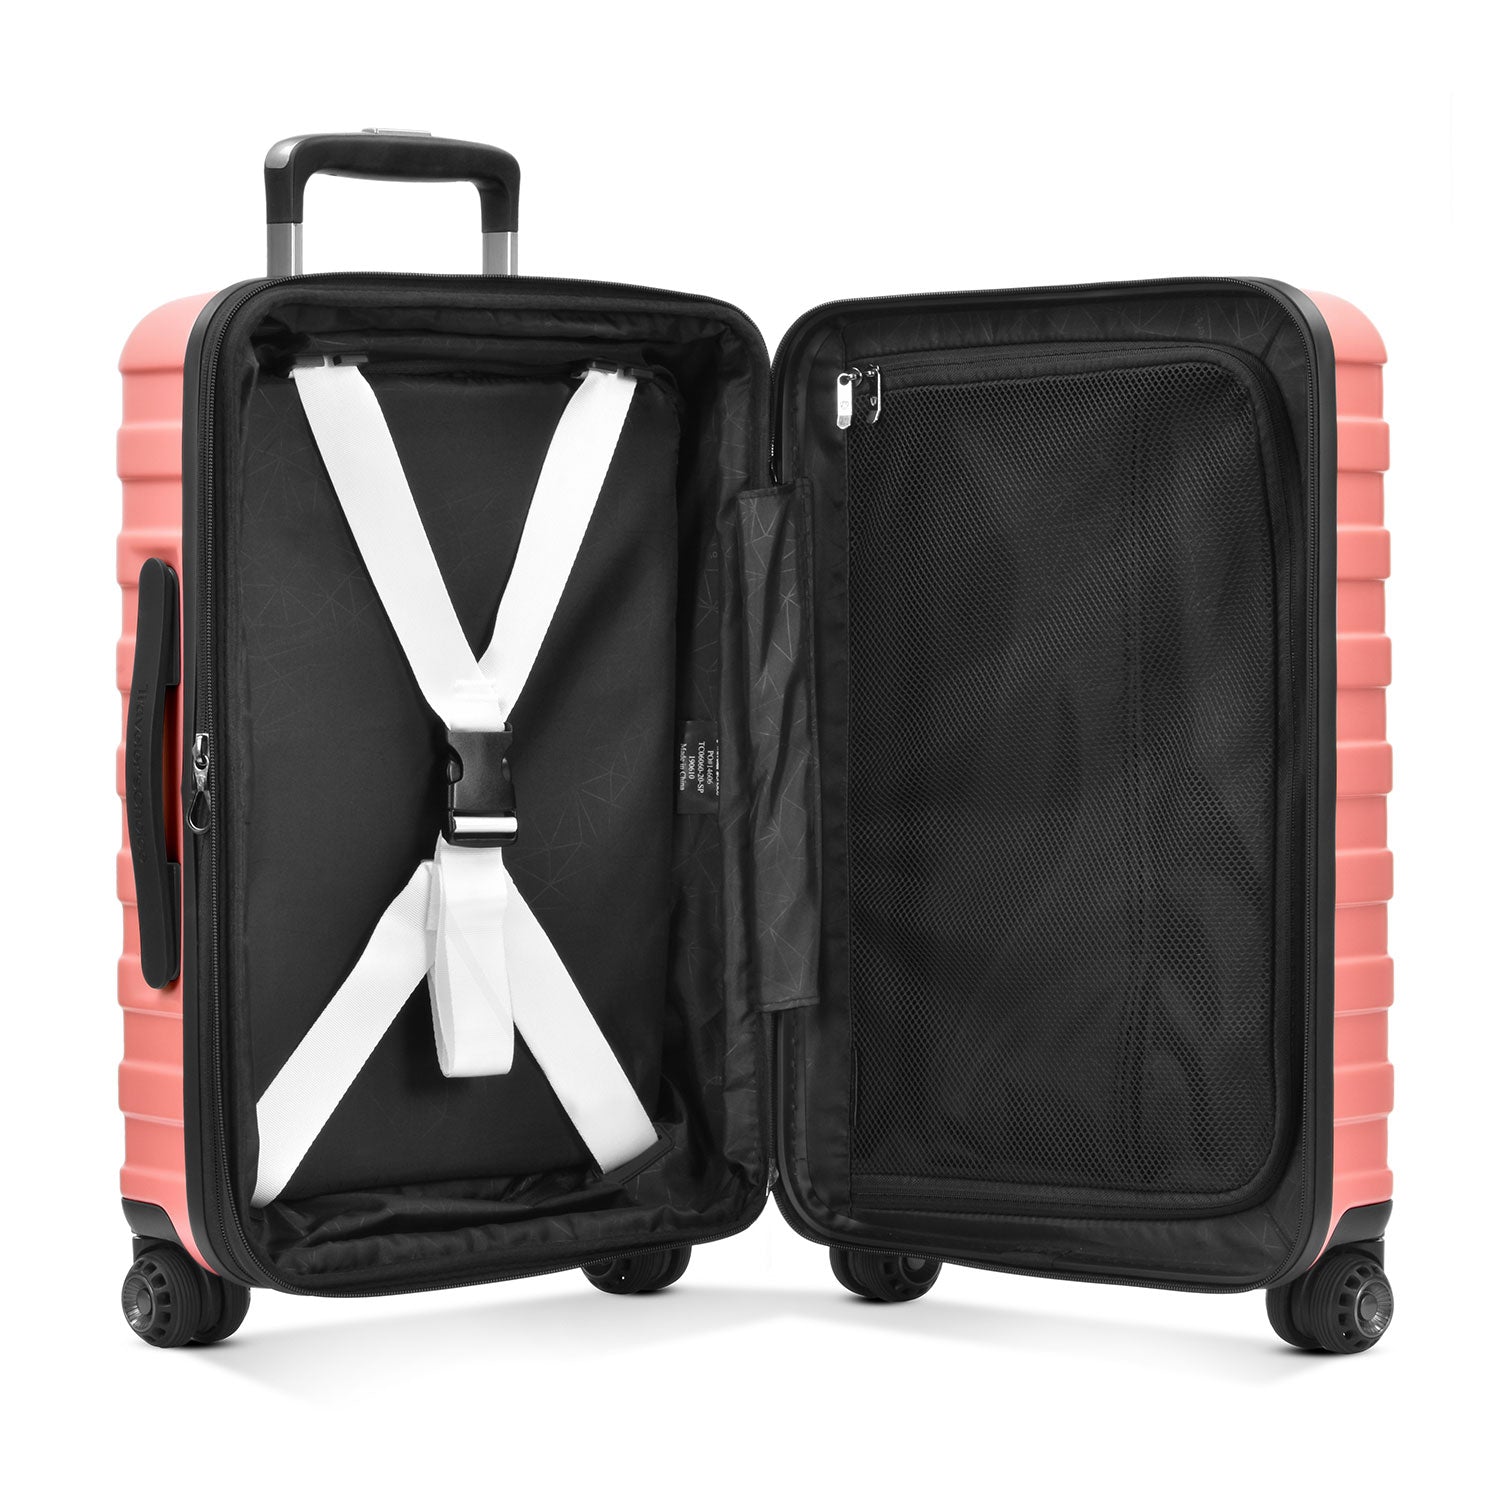 Away's Millennial Pink Luggage Is Back